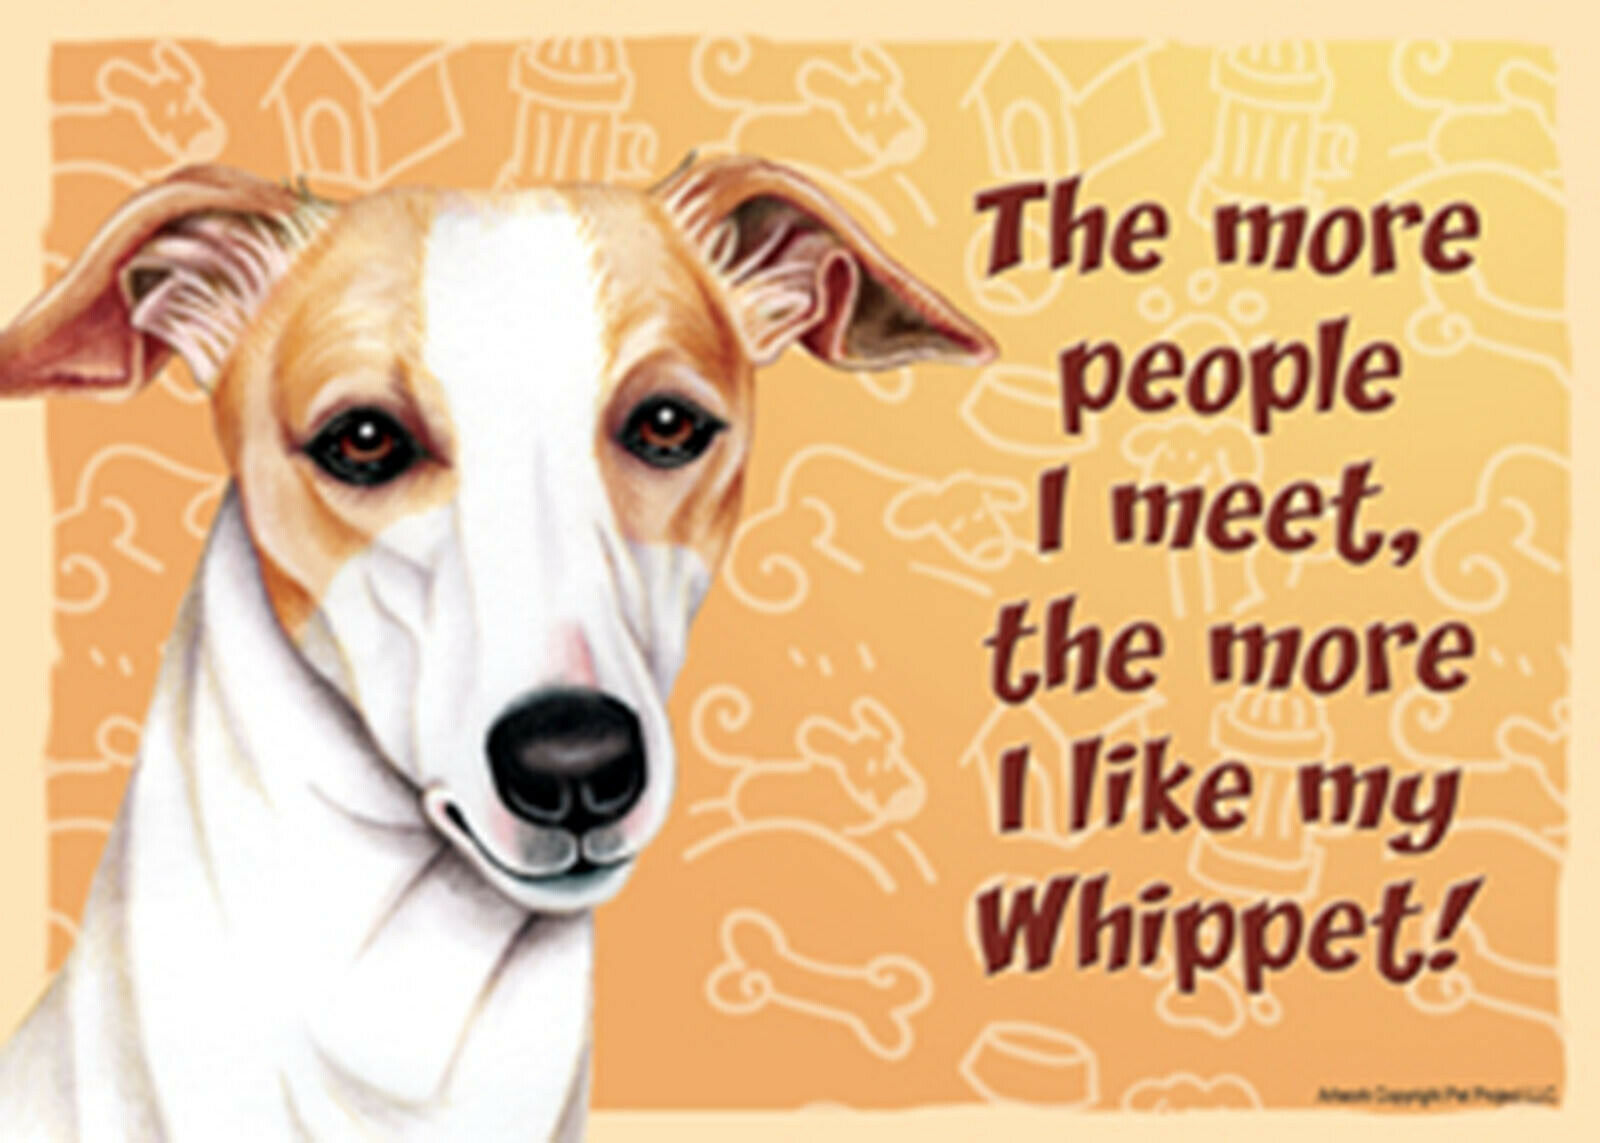 Whippet Sign - The More People I Meet, The More I Like My Whippet!